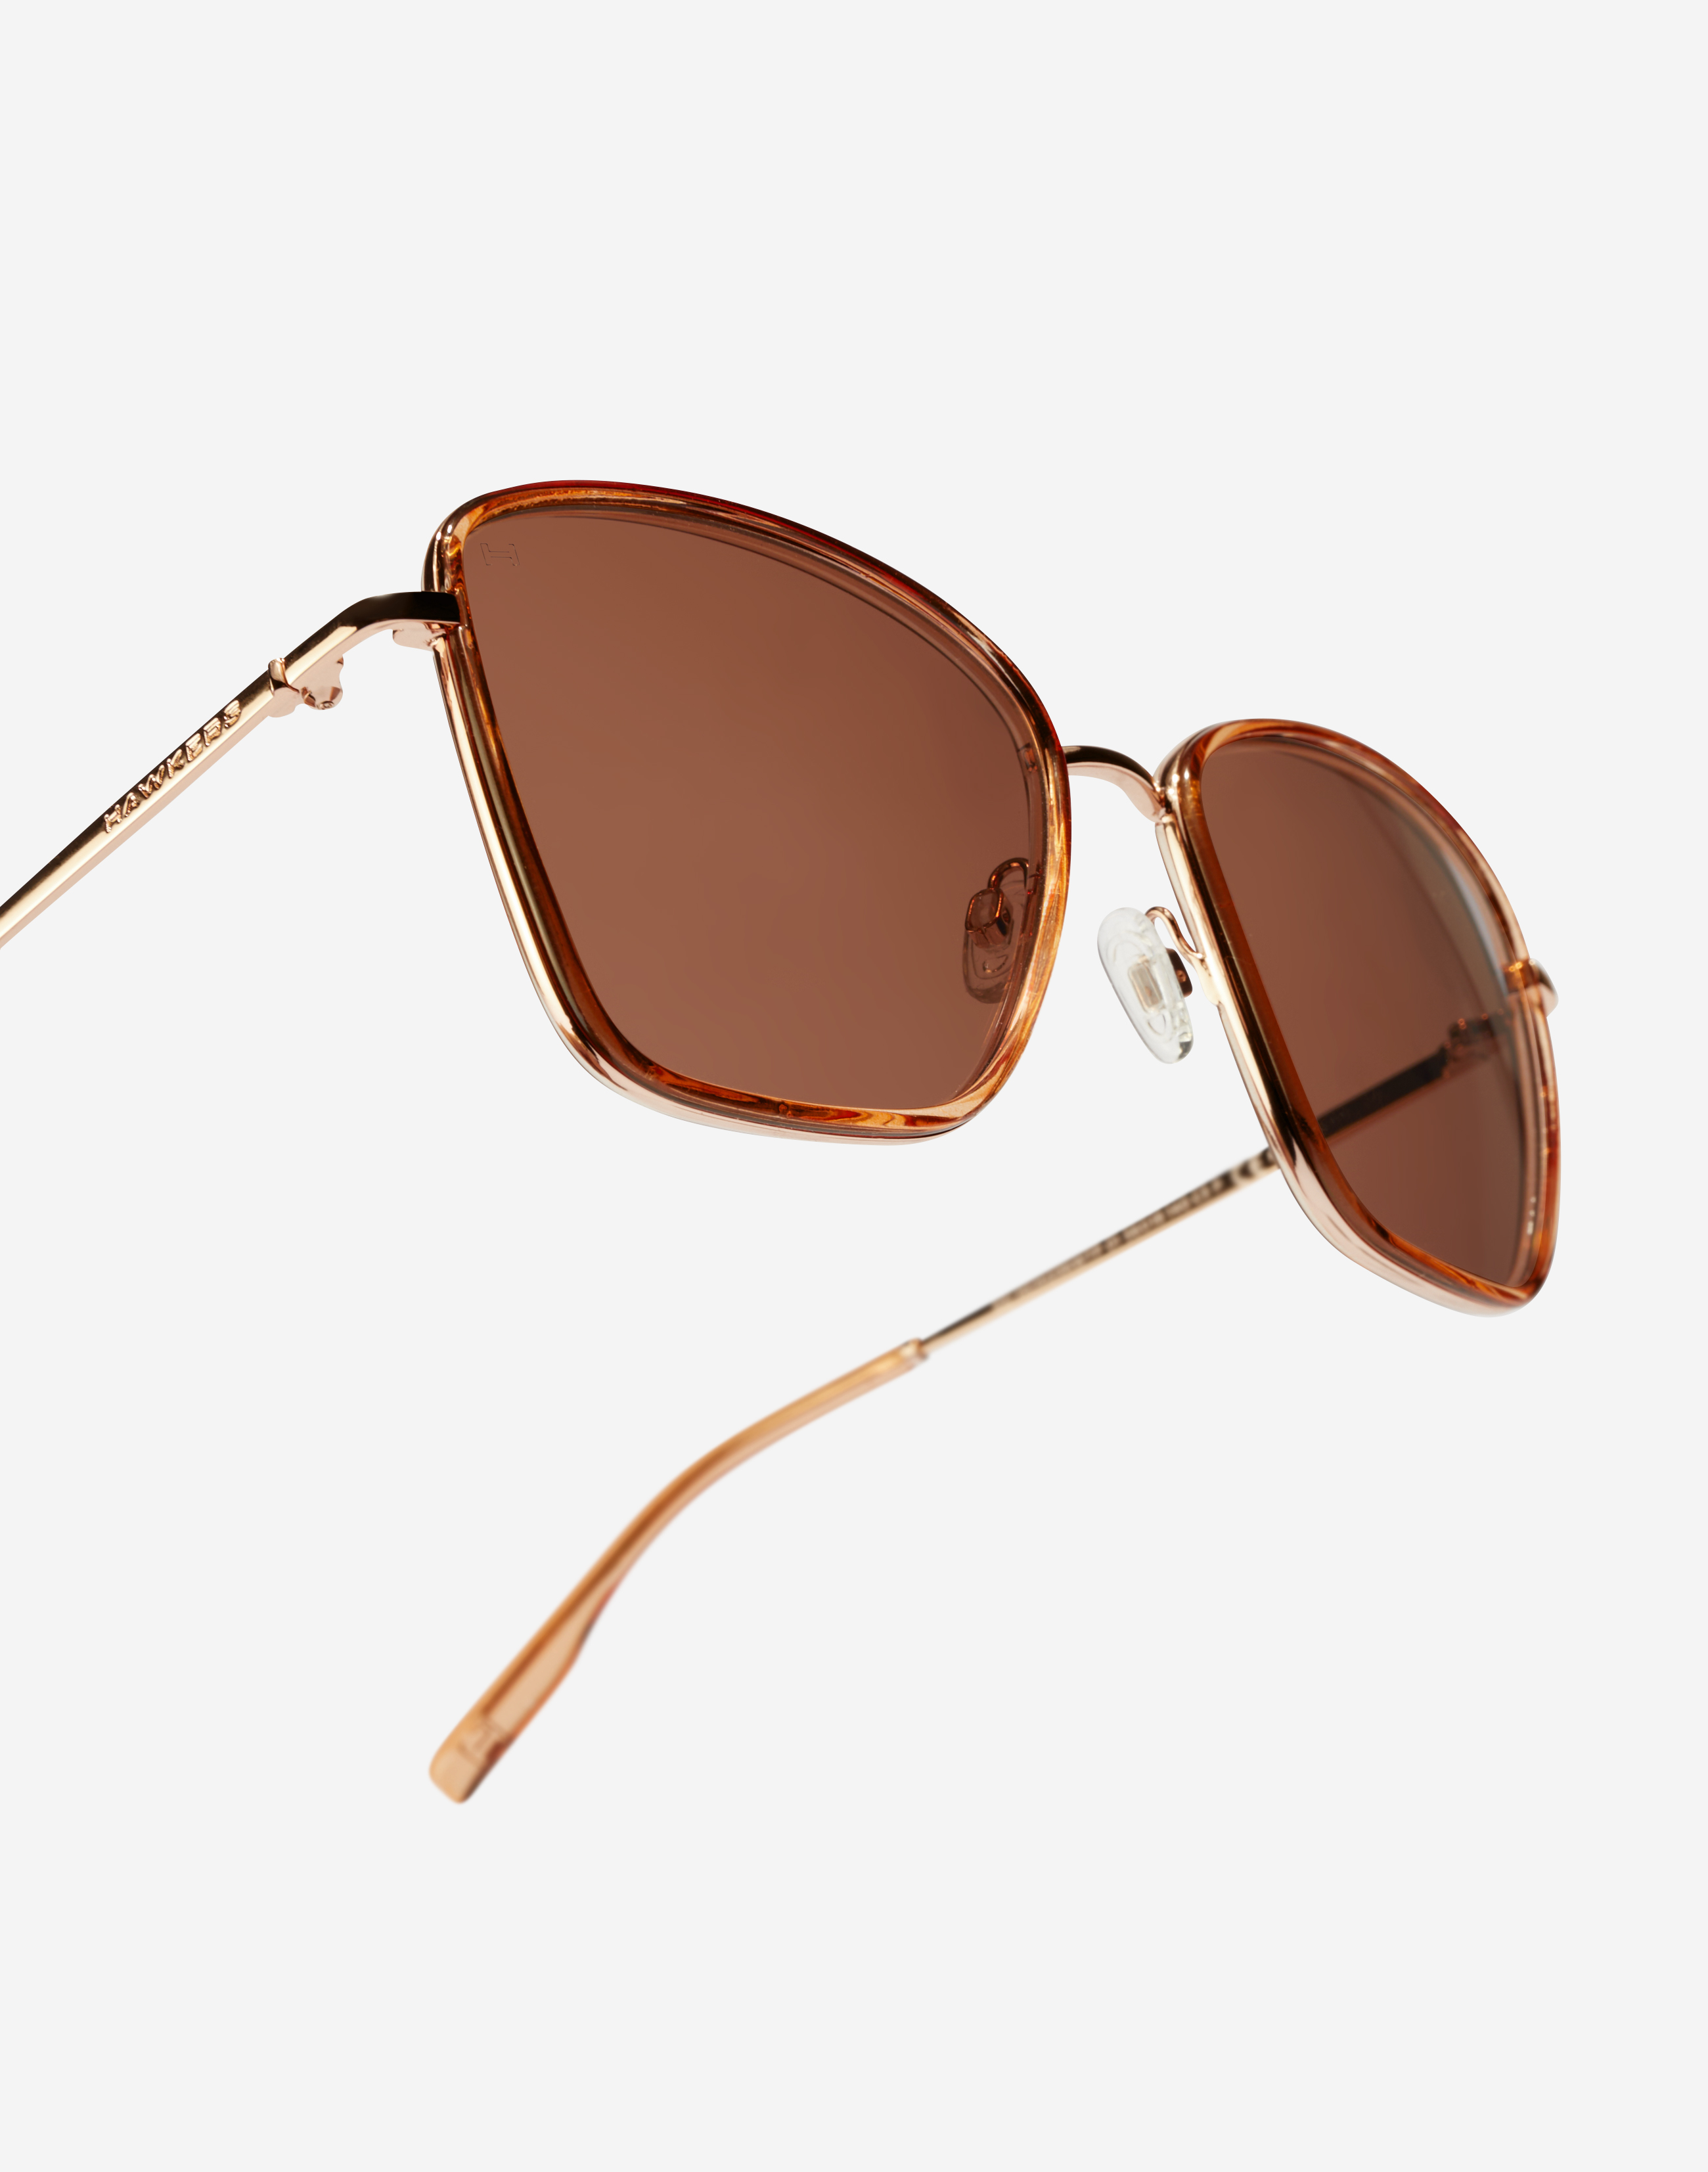 Hawkers CHILL - POLARIZED SAND BROWN medium